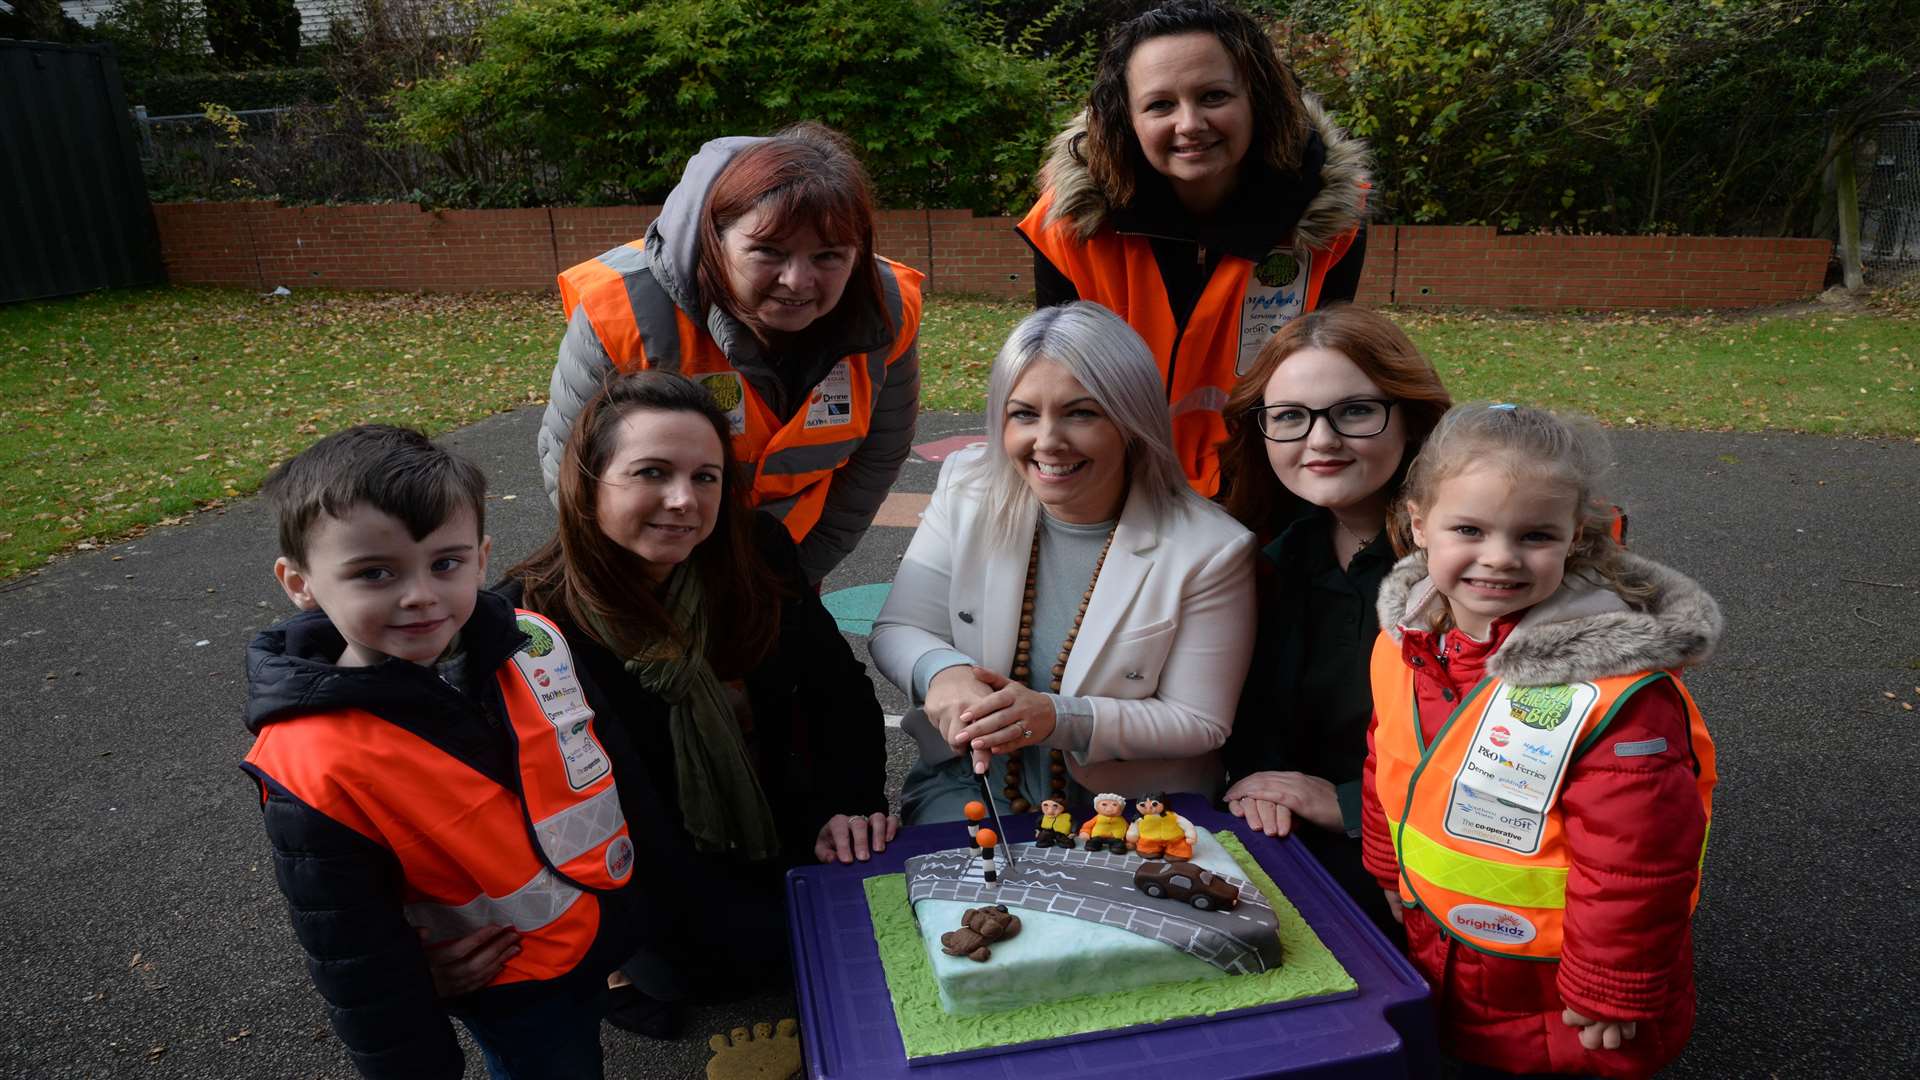 Pupils Sydney, three, and Elsie, four, sponsors Leanne Adams and Sarah Savage of Medway Council and Emily Geeson of Countrystyle Recycling, and staff members Betty Abraham and Jacqueline Hopper at the launch of Parkwood Christian Fellowship Preschool's walking bus.